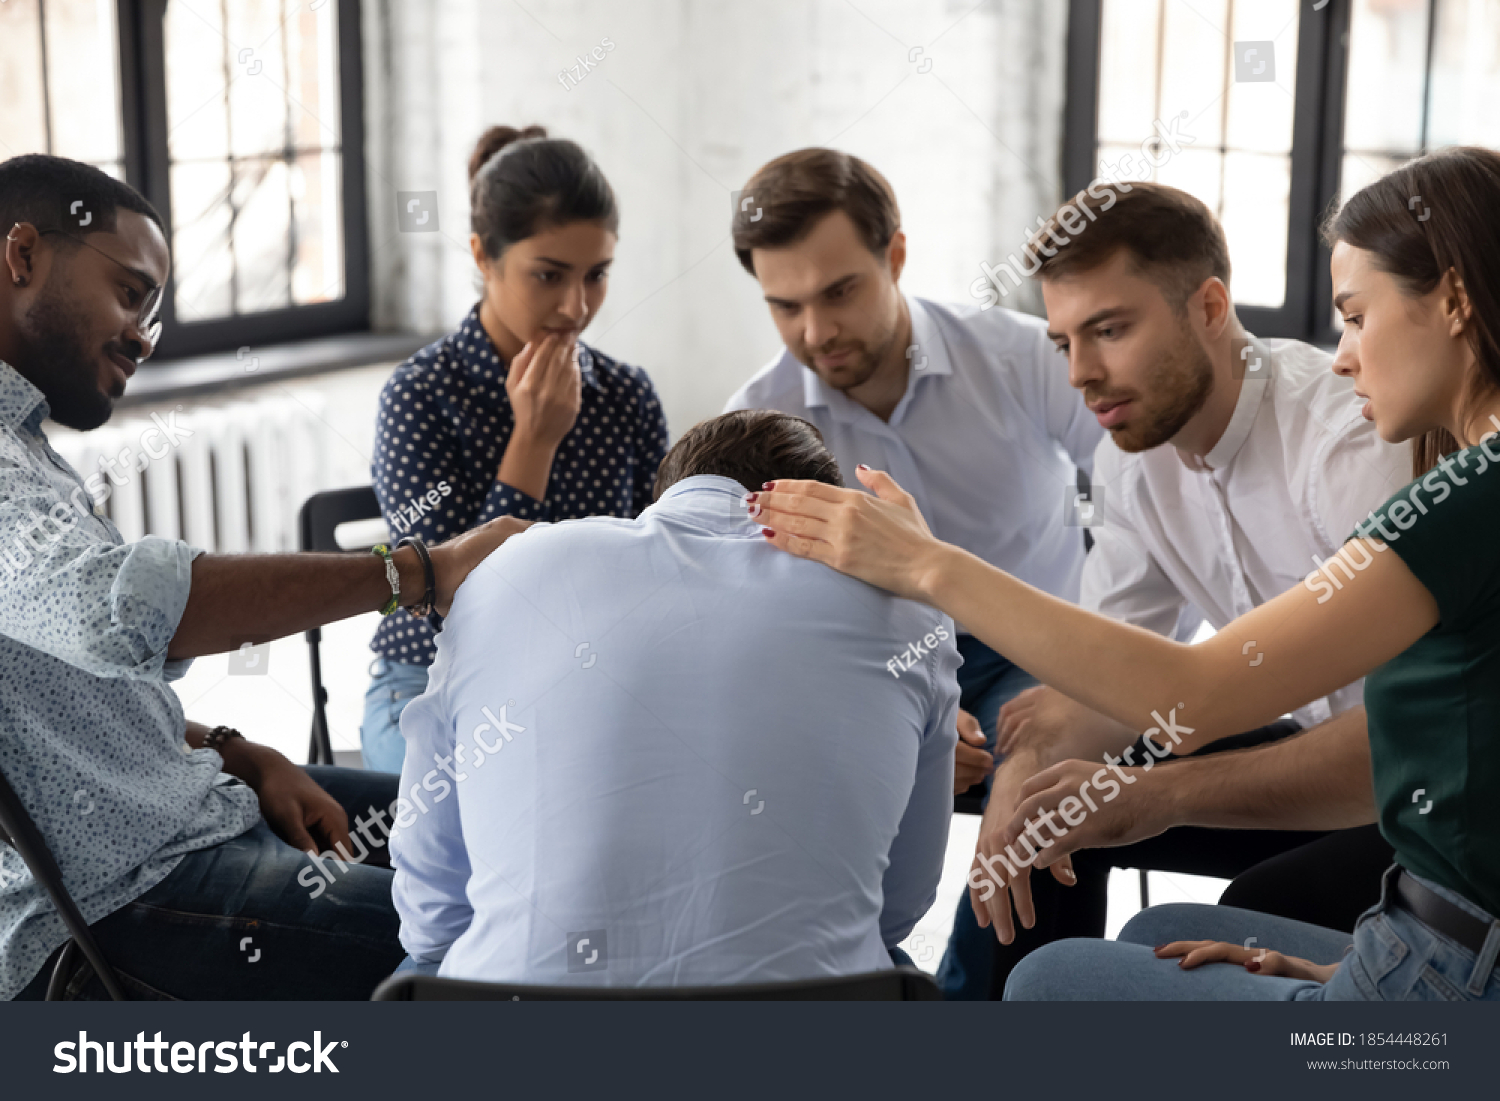 On group therapy session. Compassionate diverse multiethnic men and women gently touching shoulders of crying suffering male teammate sharing his personal problem expressing support care understanding #1854448261